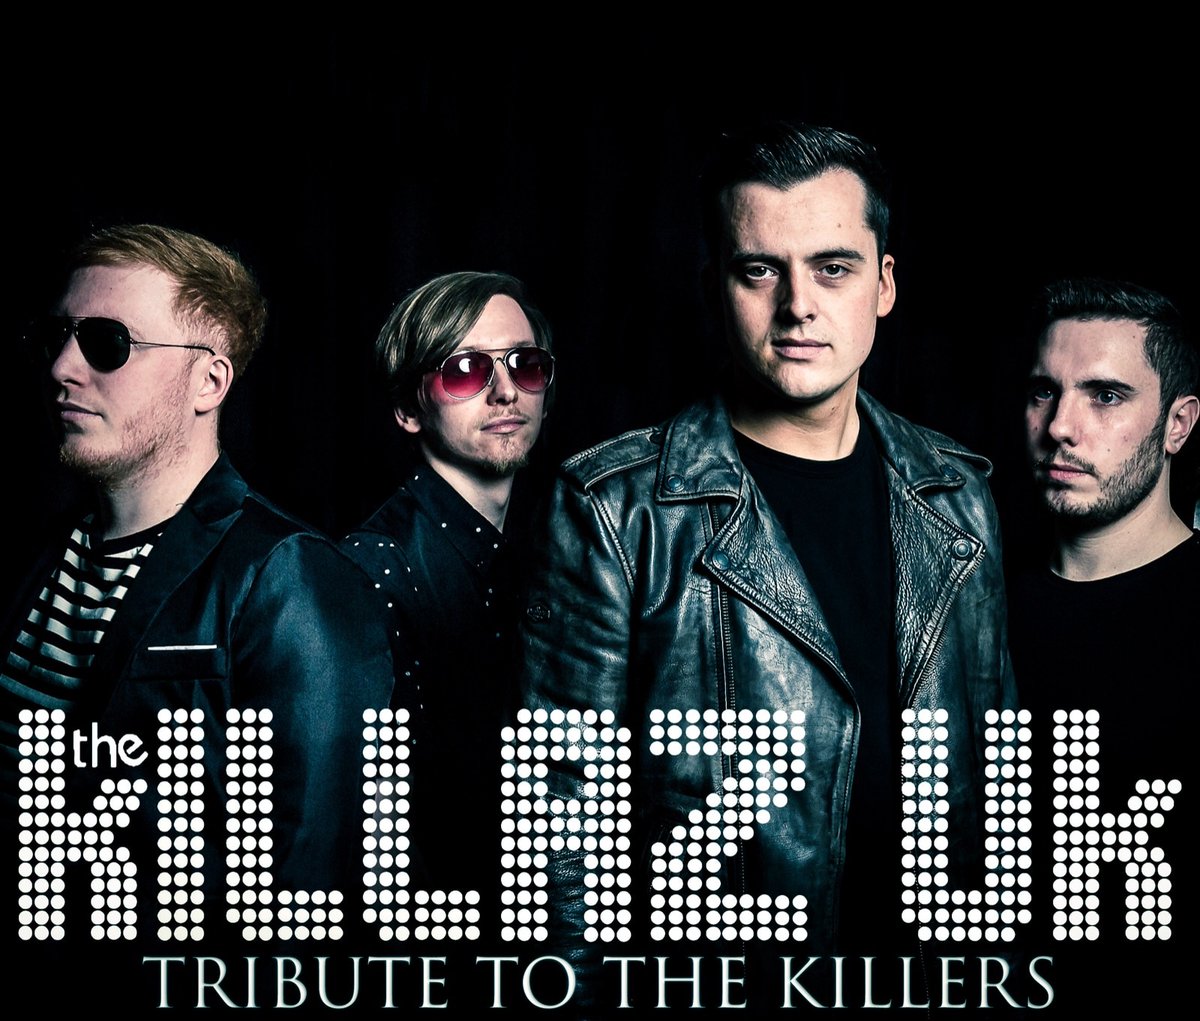 'We can't wait til tomorrow...' As we are heading back to #therhodehouse in #suttoncoldfield 
Get your tickets 🎟️ now and find out if we are #Human🧍or are we Dancers
skiddle.com/e/36184029
#killerstribute #thekillers #thekillersmusic #victims #theman #mrbrightside #livemusic